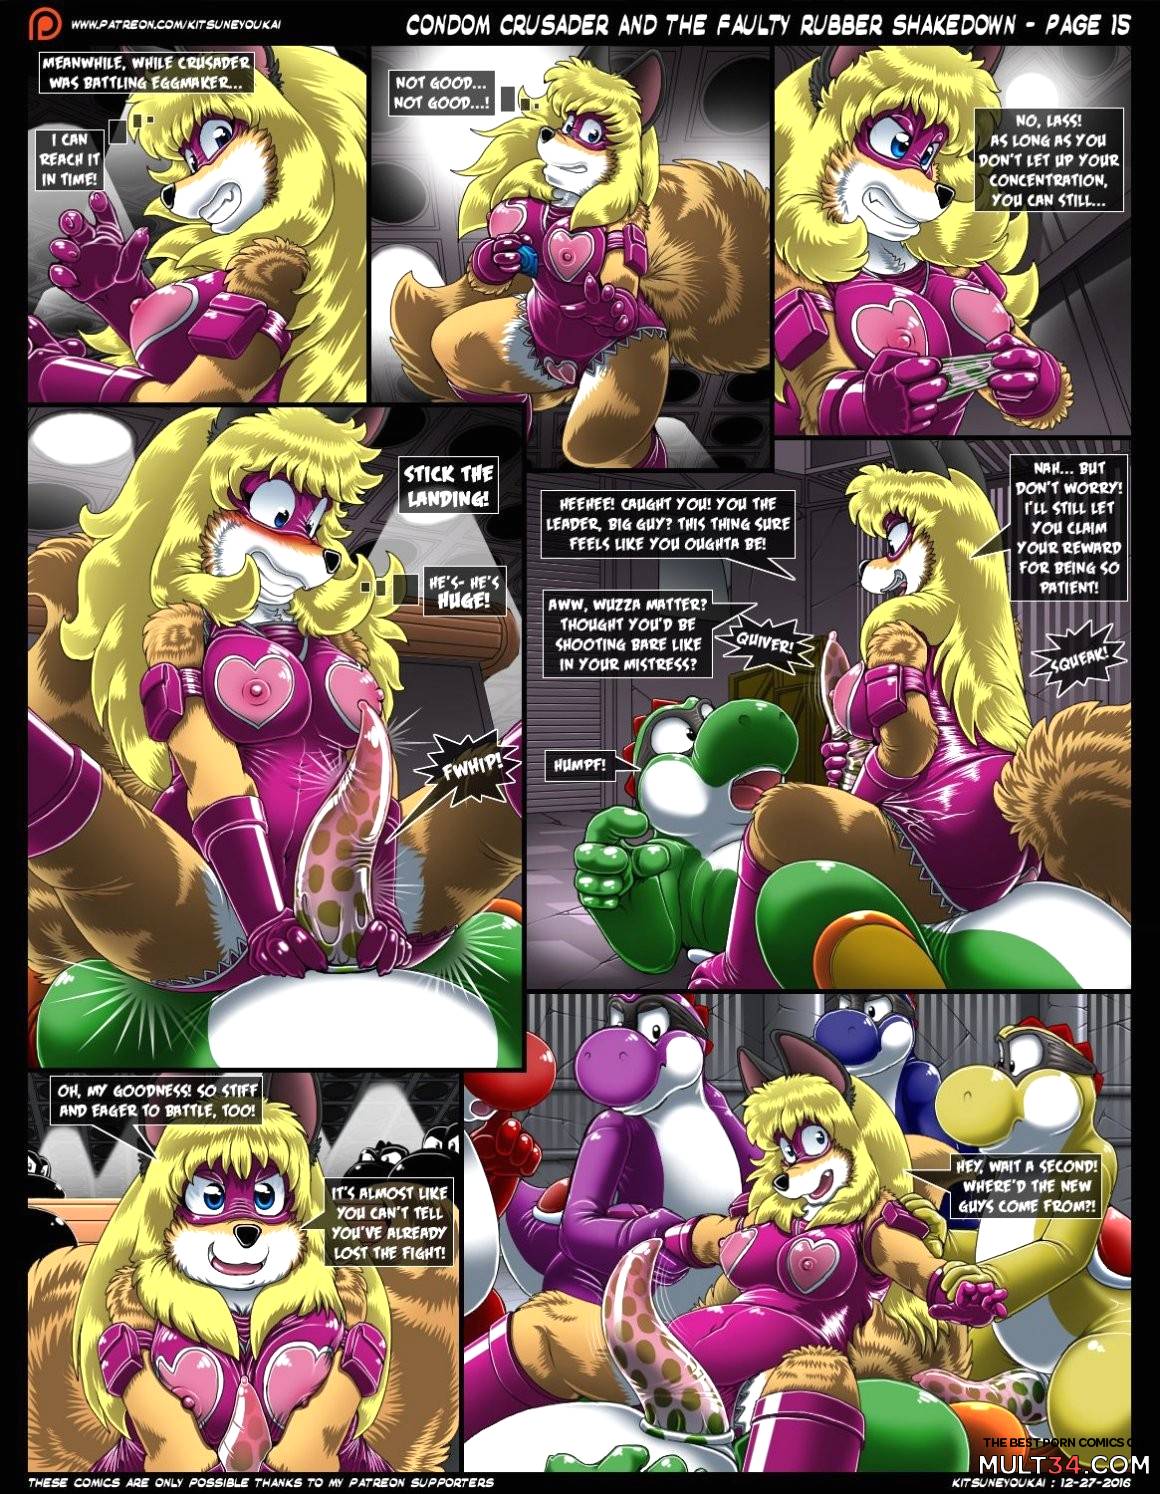 Condom Crusader And The Faulty Rubber Shakedown page 16